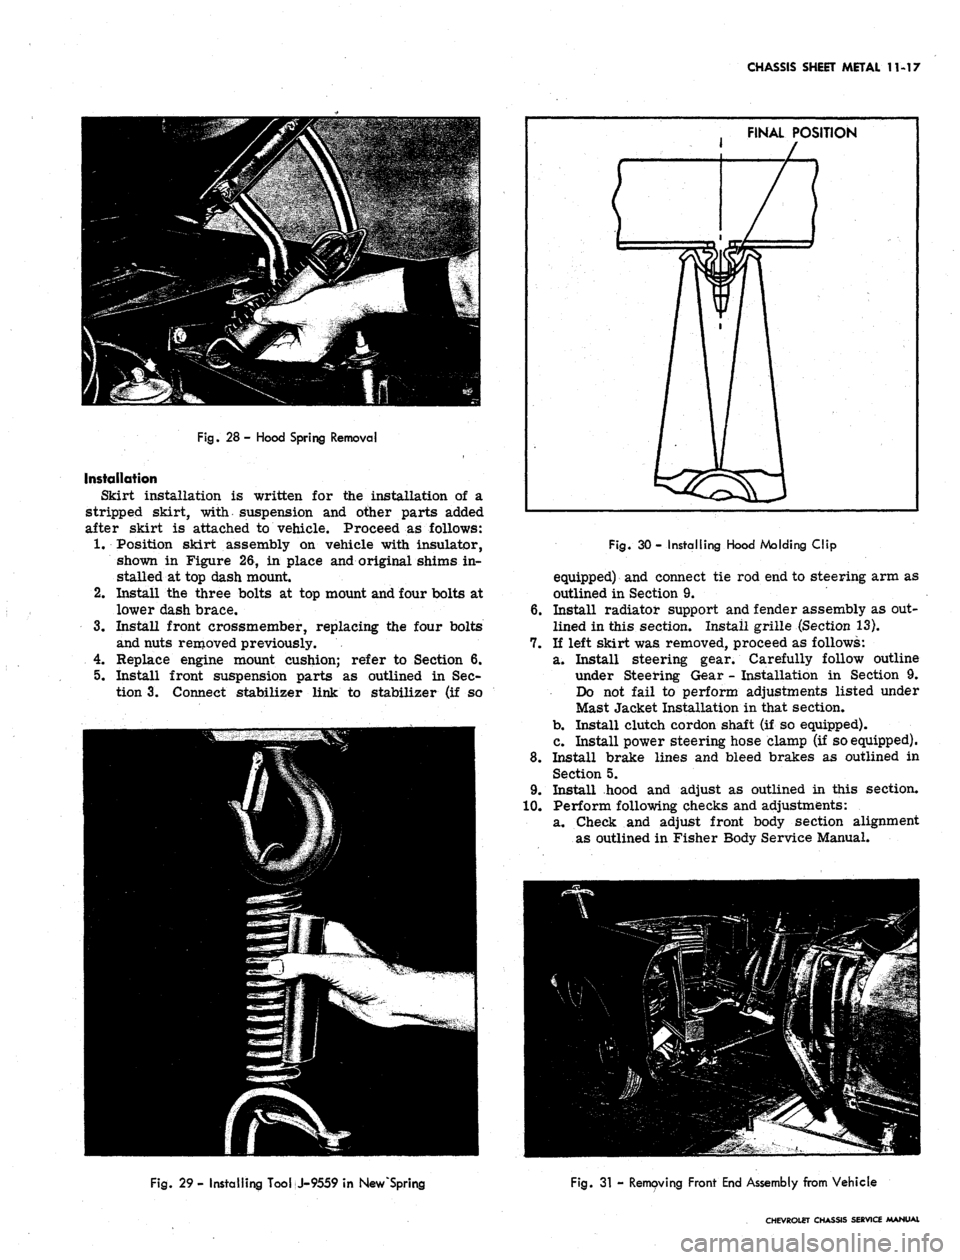 CHEVROLET CAMARO 1967 1.G Chassis Manual Online 
CHASSIS SHEET METAL 11-17

Fig.
 28- Hood Spring Removal

Installation

Skirt installation is written for the installation of a

stripped skirt, with suspension and otiier parts added

after skirt is